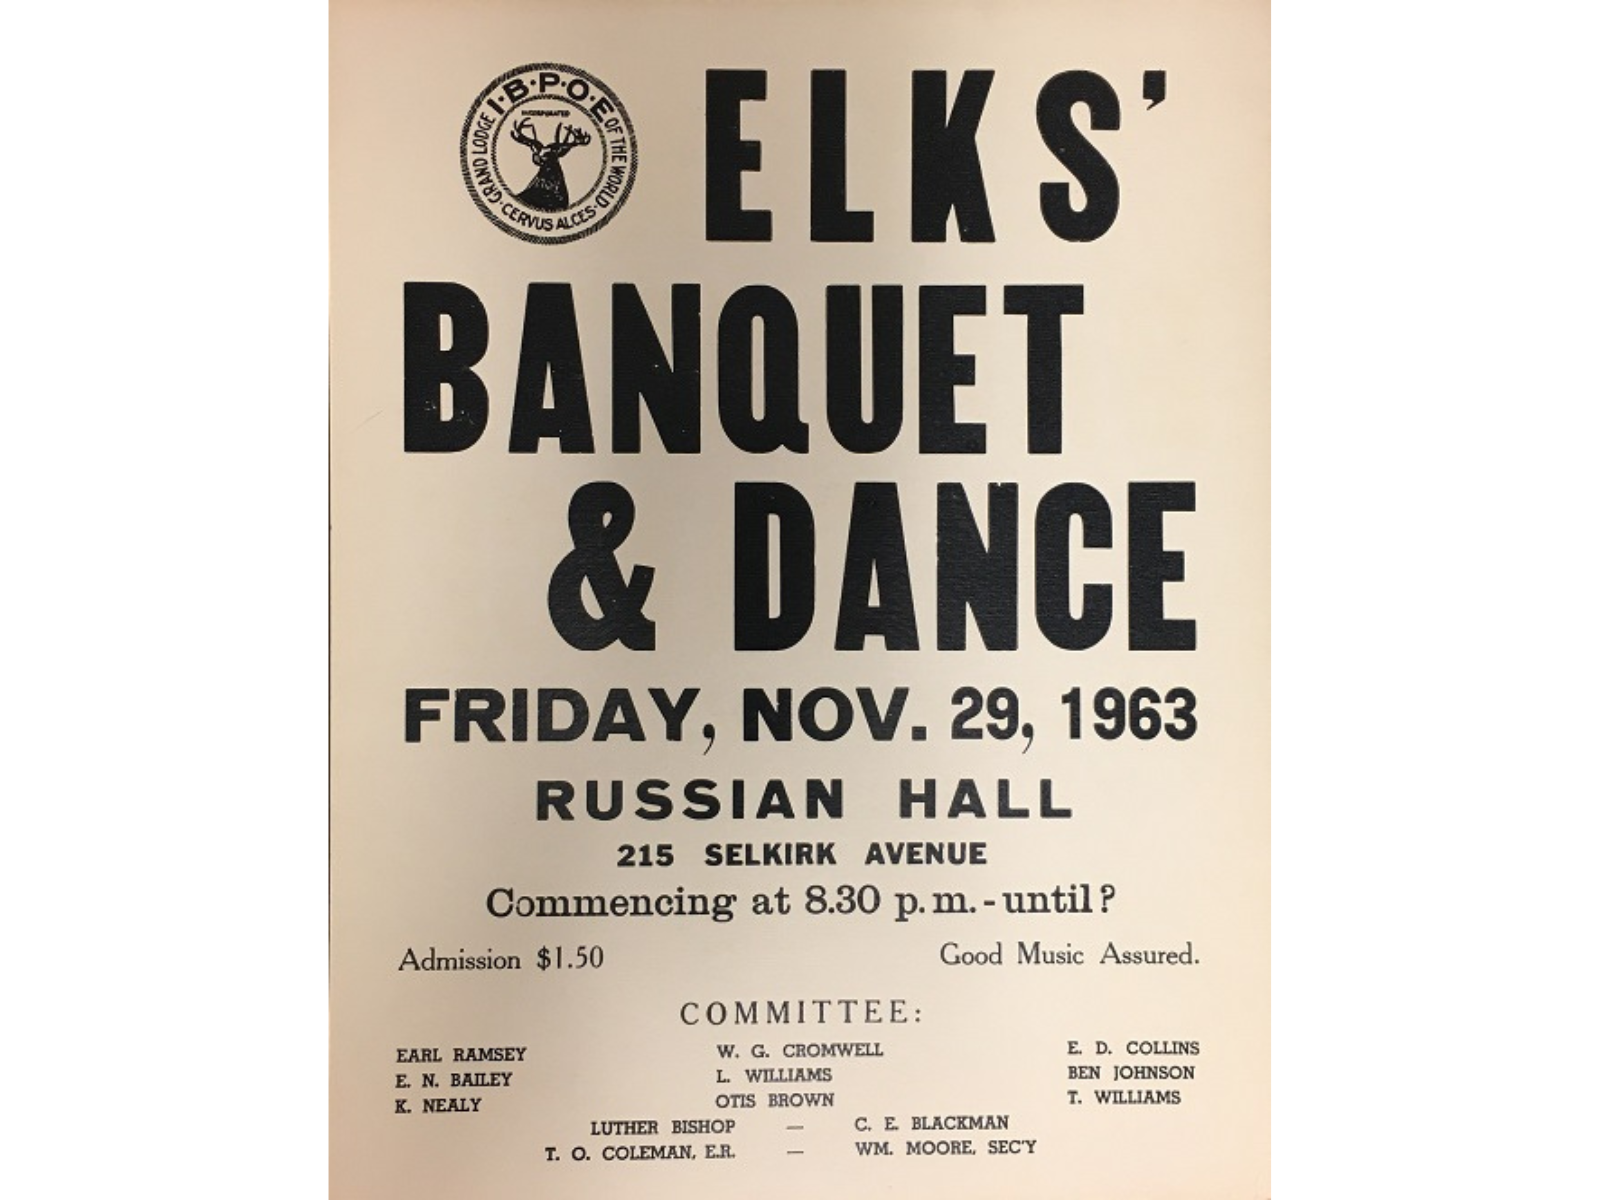 A poster for an Elks' Banquet & Dance, taking place on Friday, No. 29, 1963 at the Russian Hall.